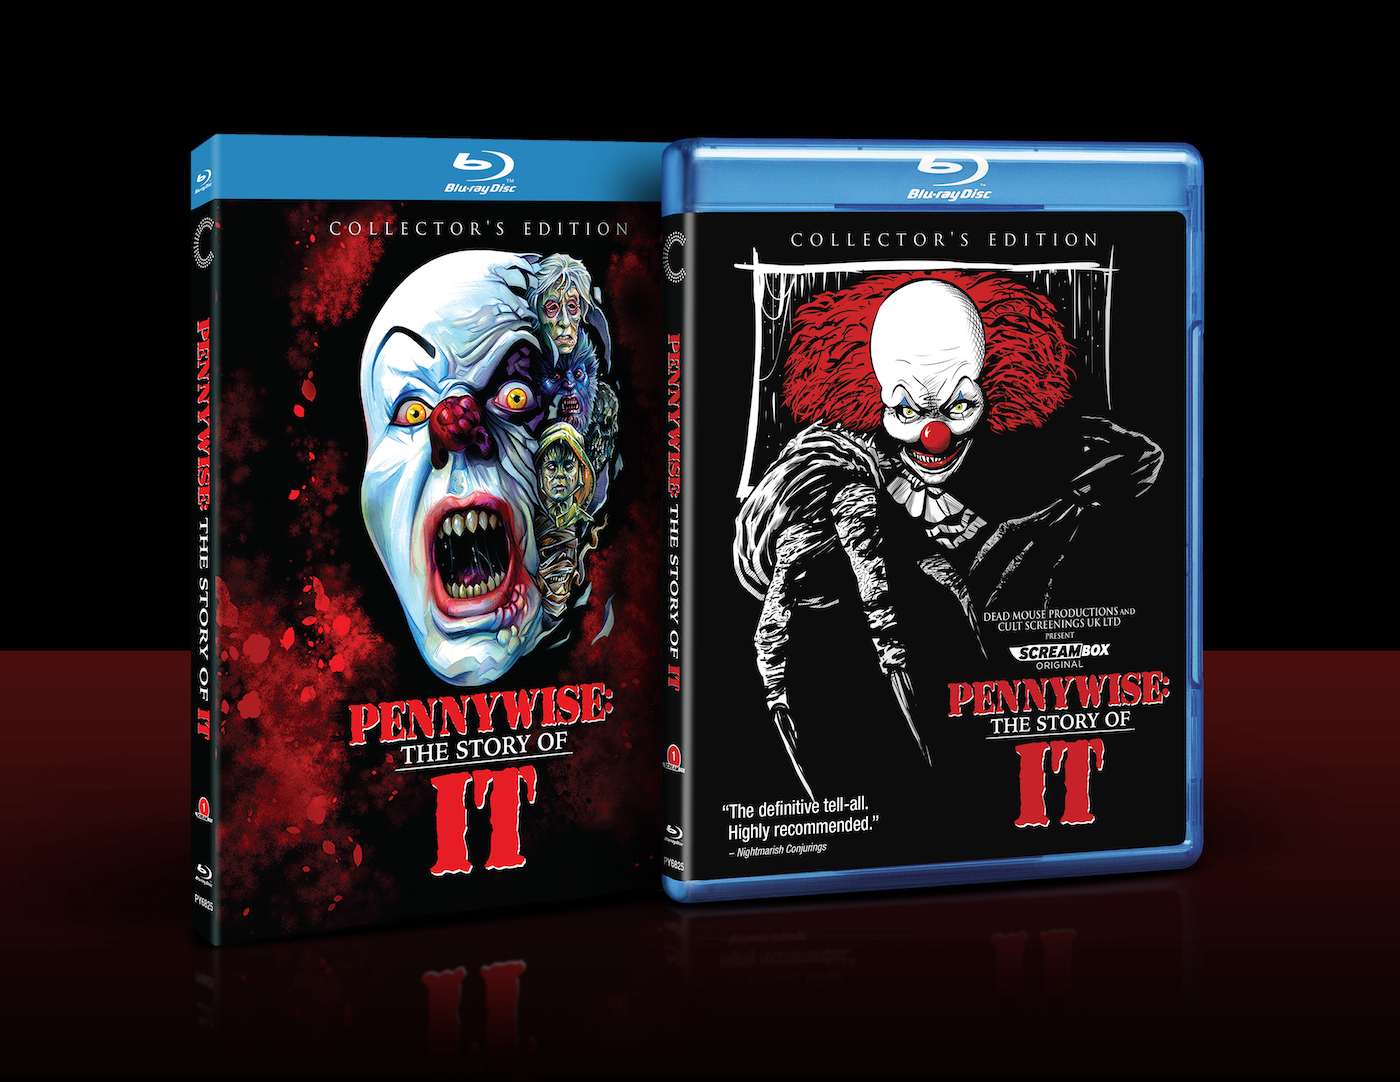 Visser elleboog Contract Pennywise: The Story of IT Scares up a Collector's Edition Blu-ray!